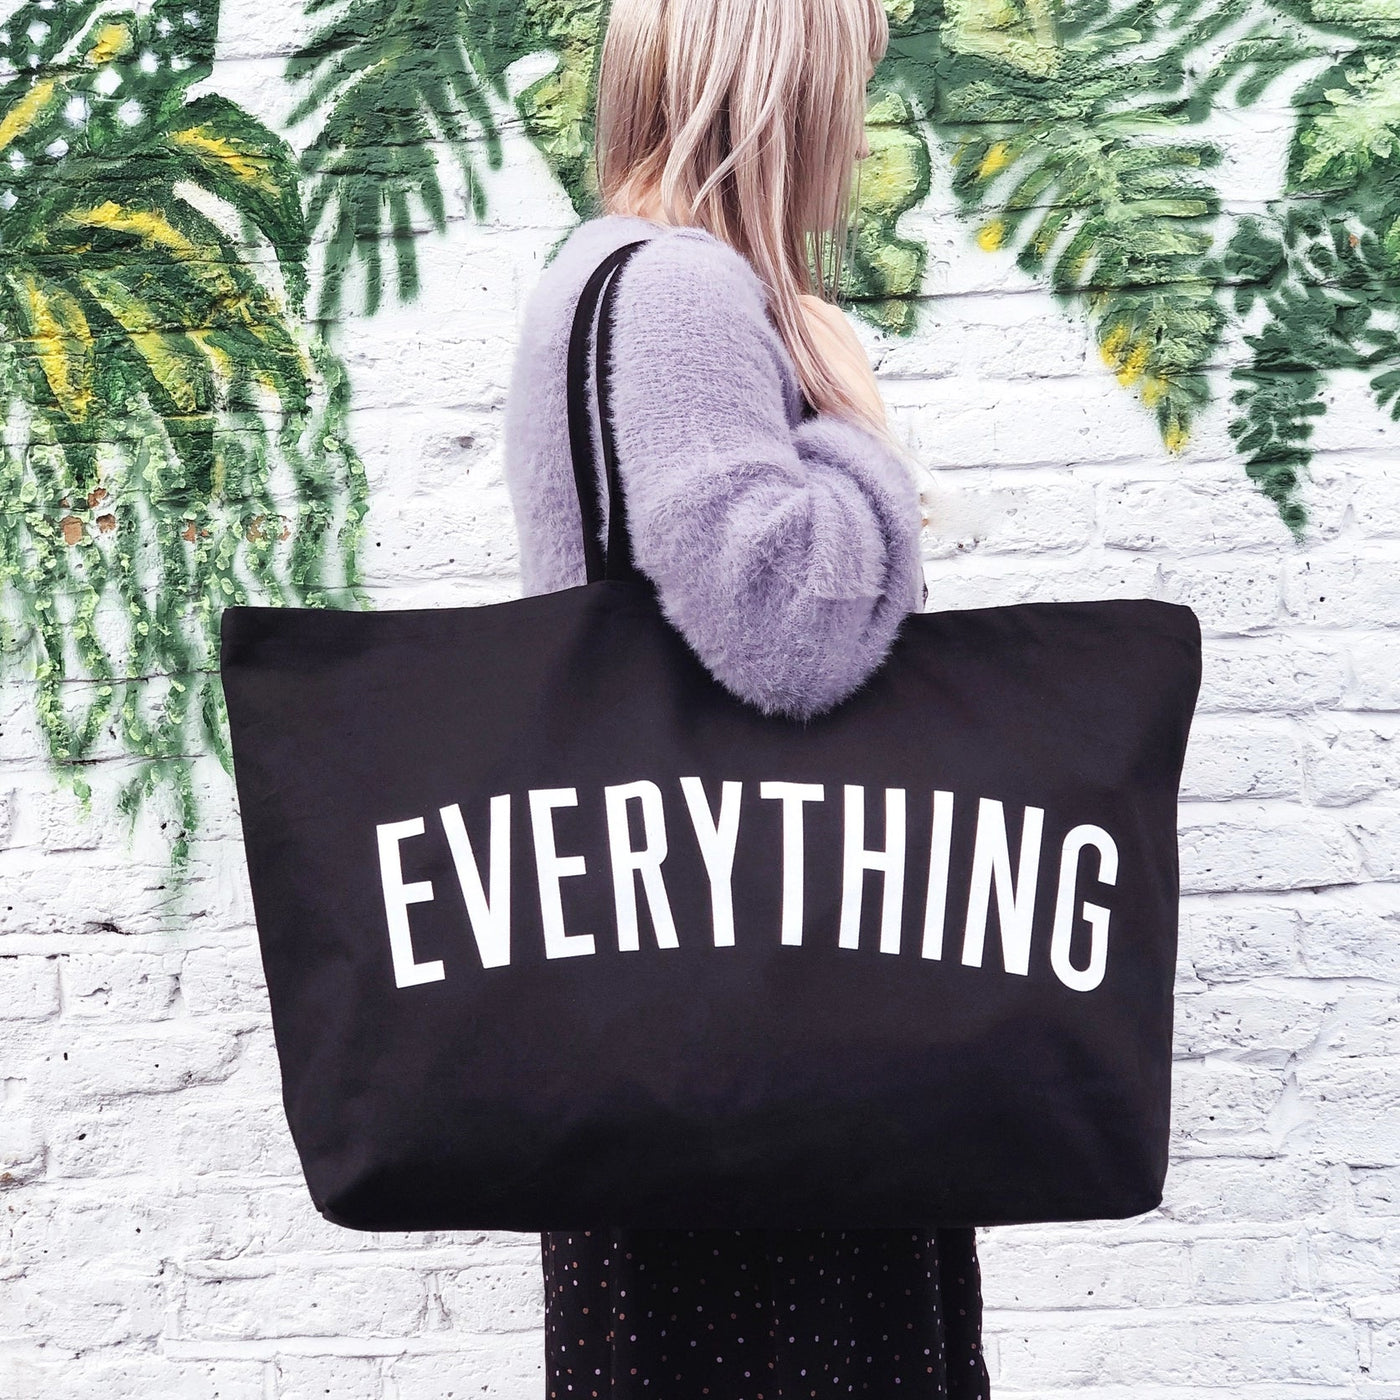 Everything - Black REALLY Big Bag by Alphabet Bags - Petite Belle